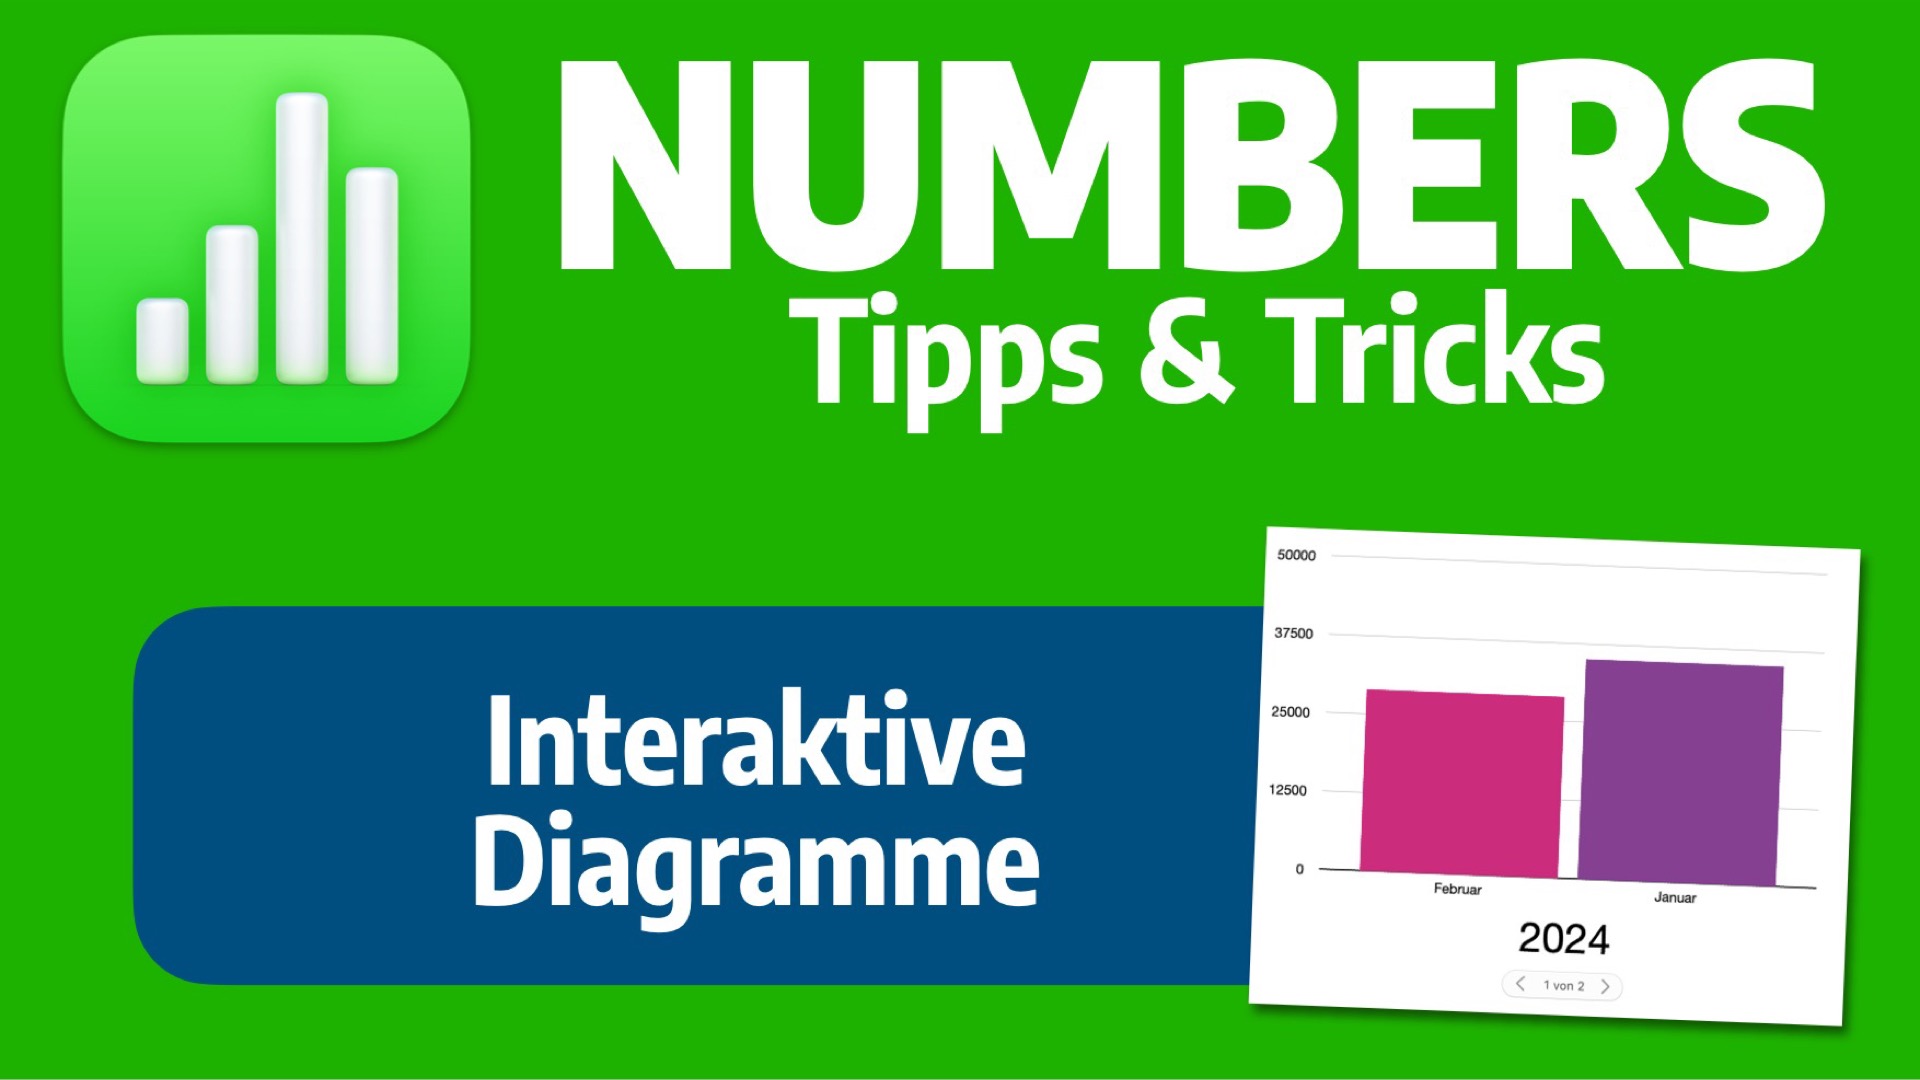 Image for NUMBERS - Interaktive Diagramme